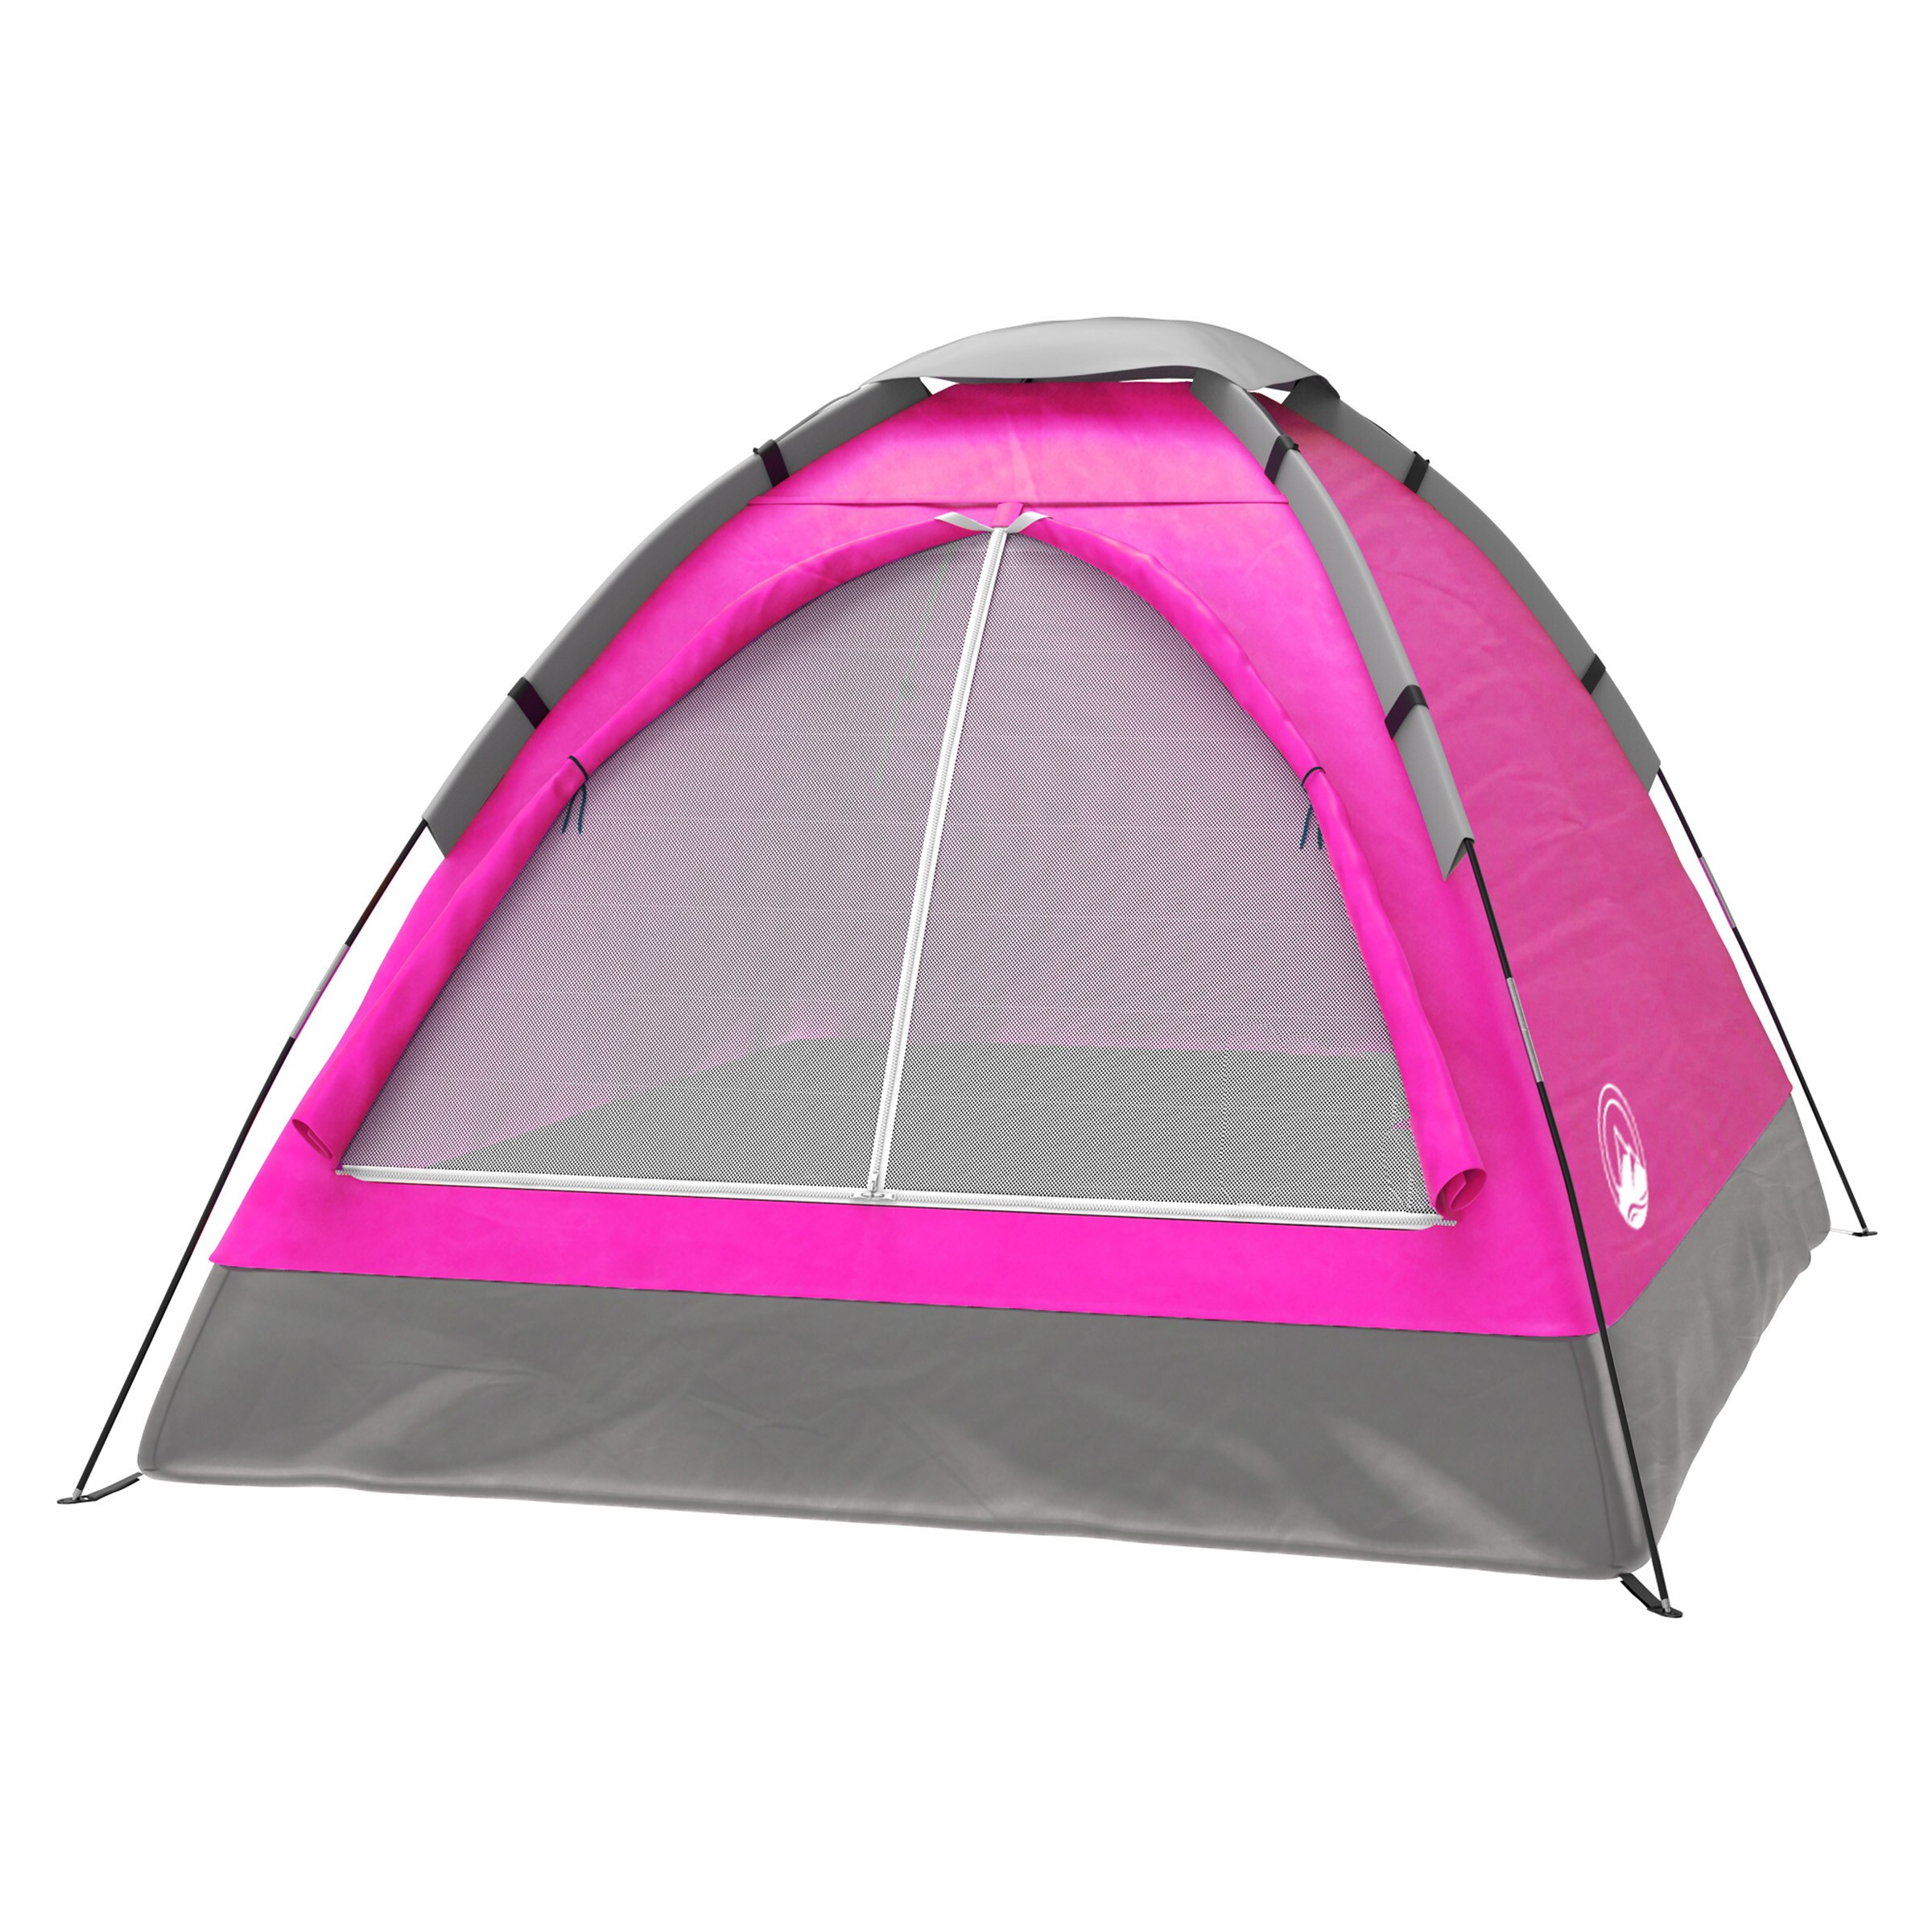 2 Person Tent With Rain Fly And Carry Bag Pink Tents At Lowes